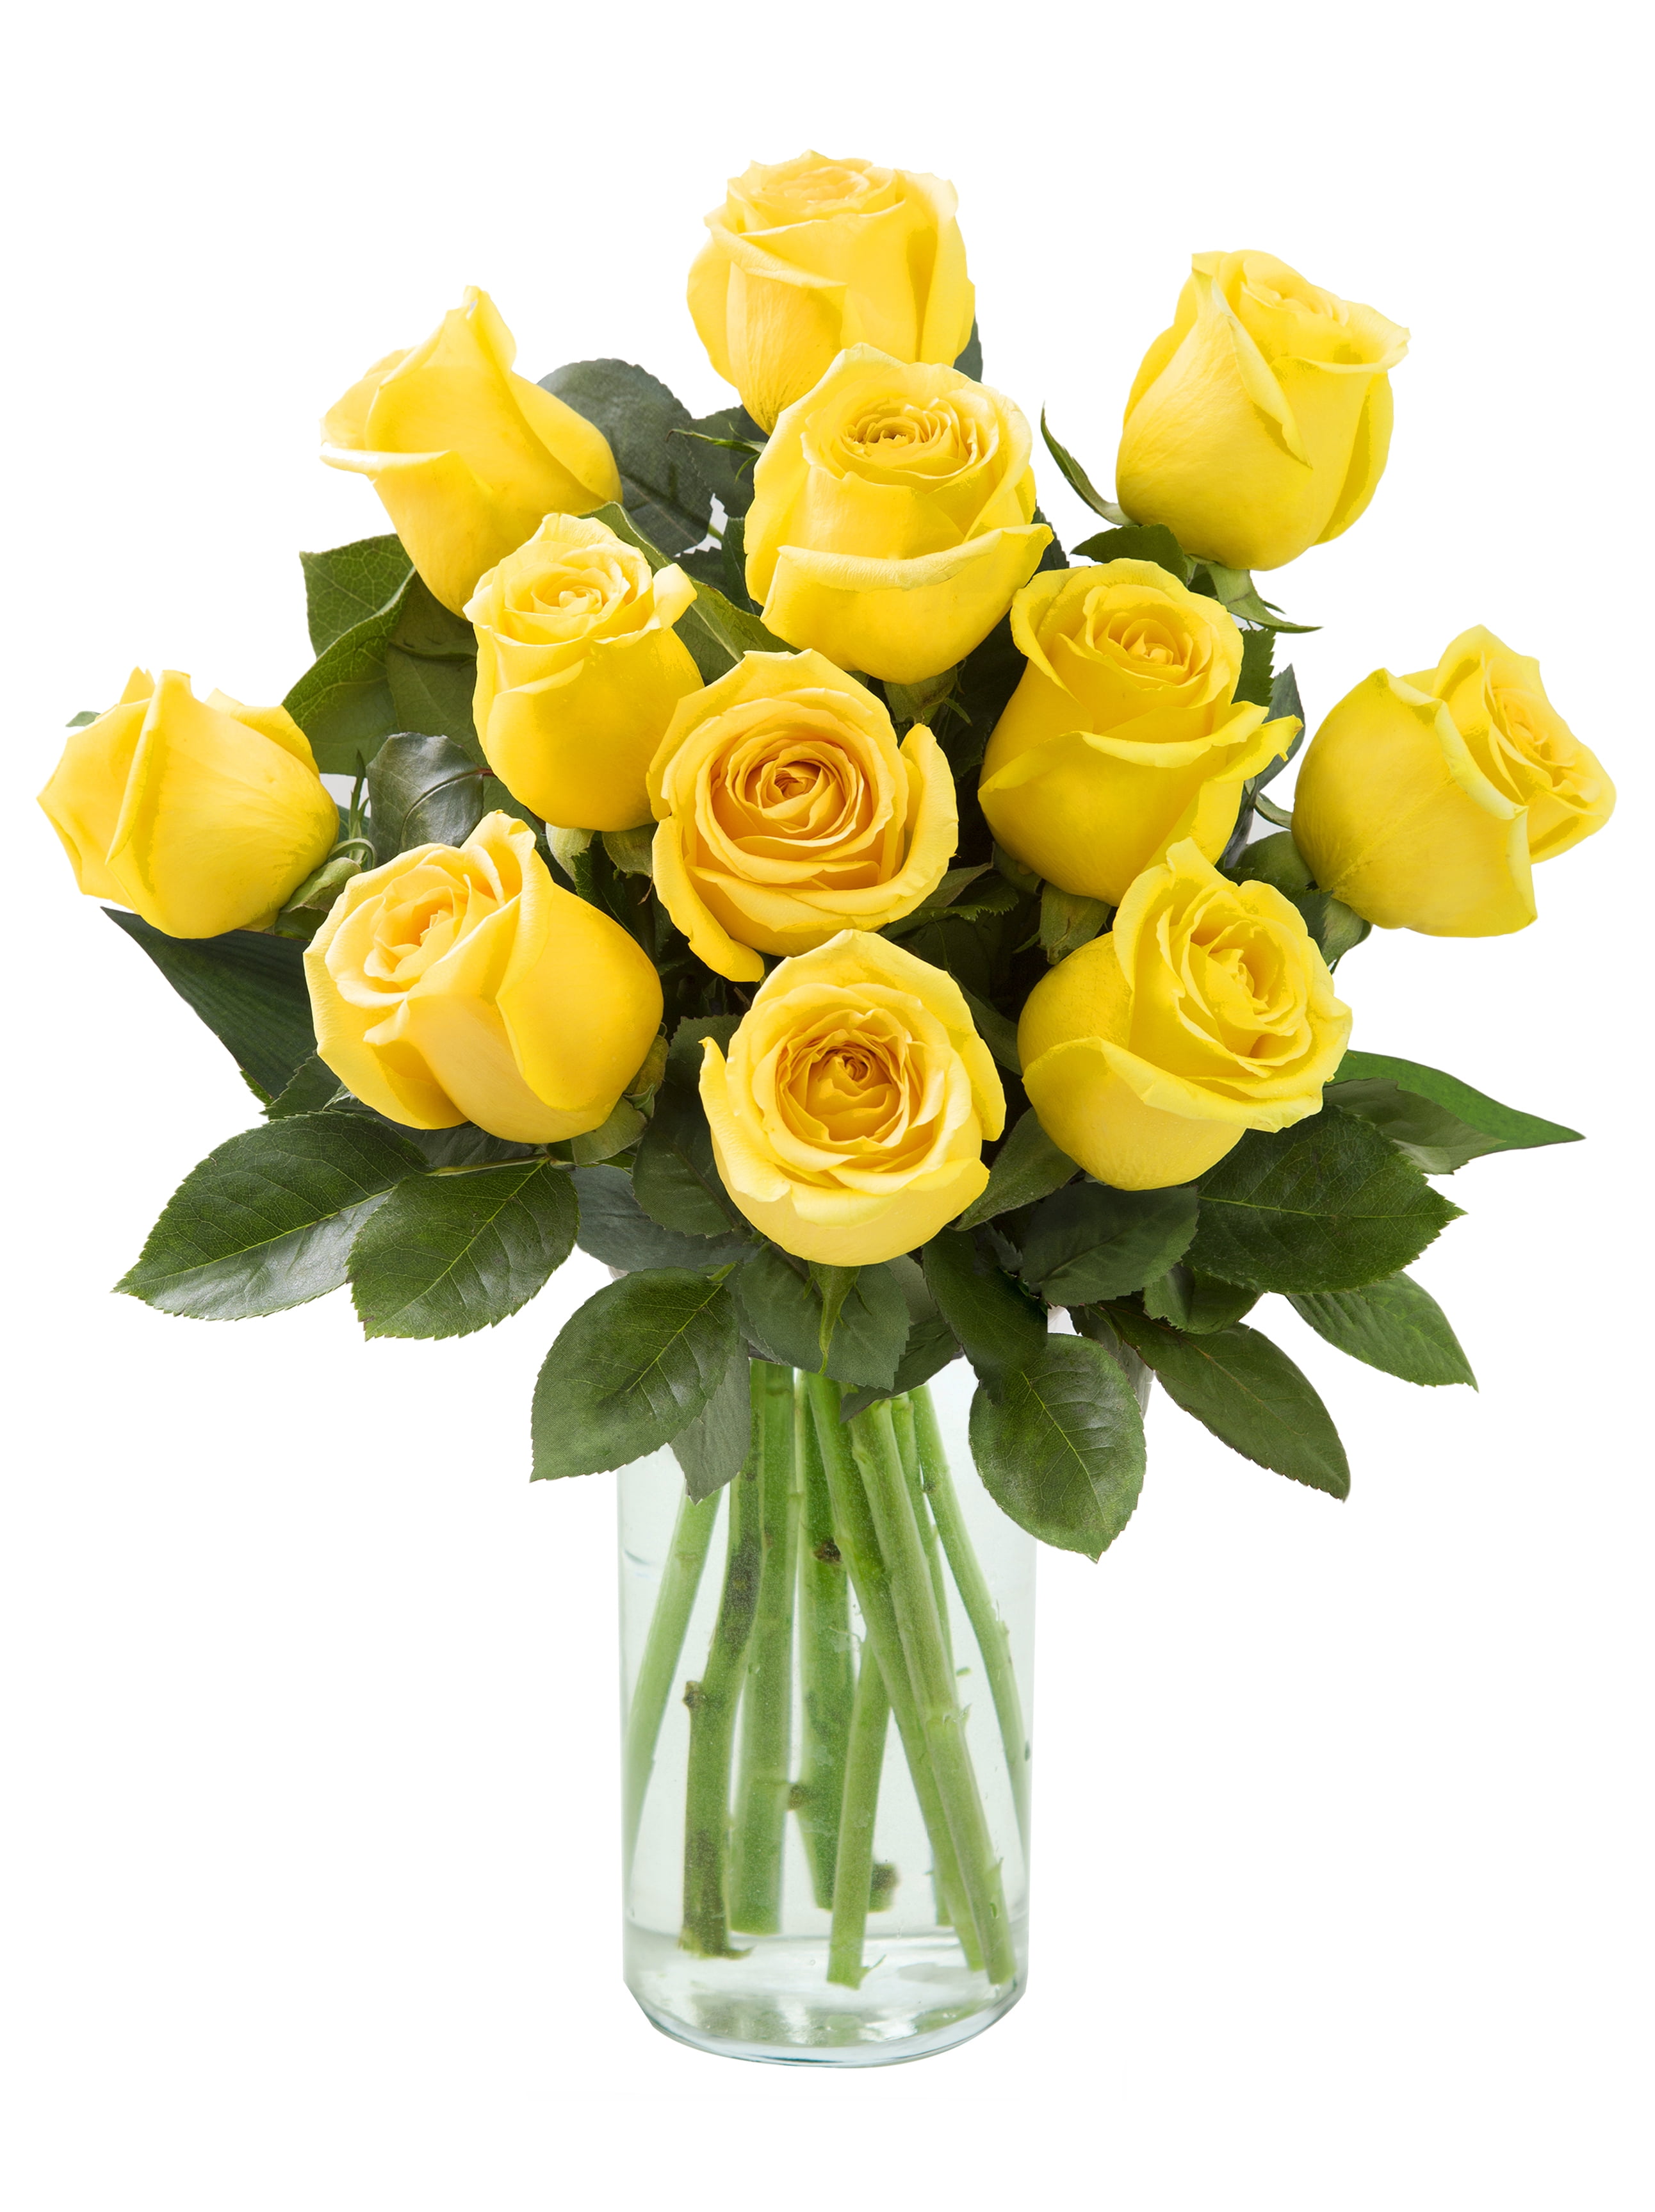 Arabella Farm Direct Bouquet Of 12 Fresh Cut Yellow Roses With Free